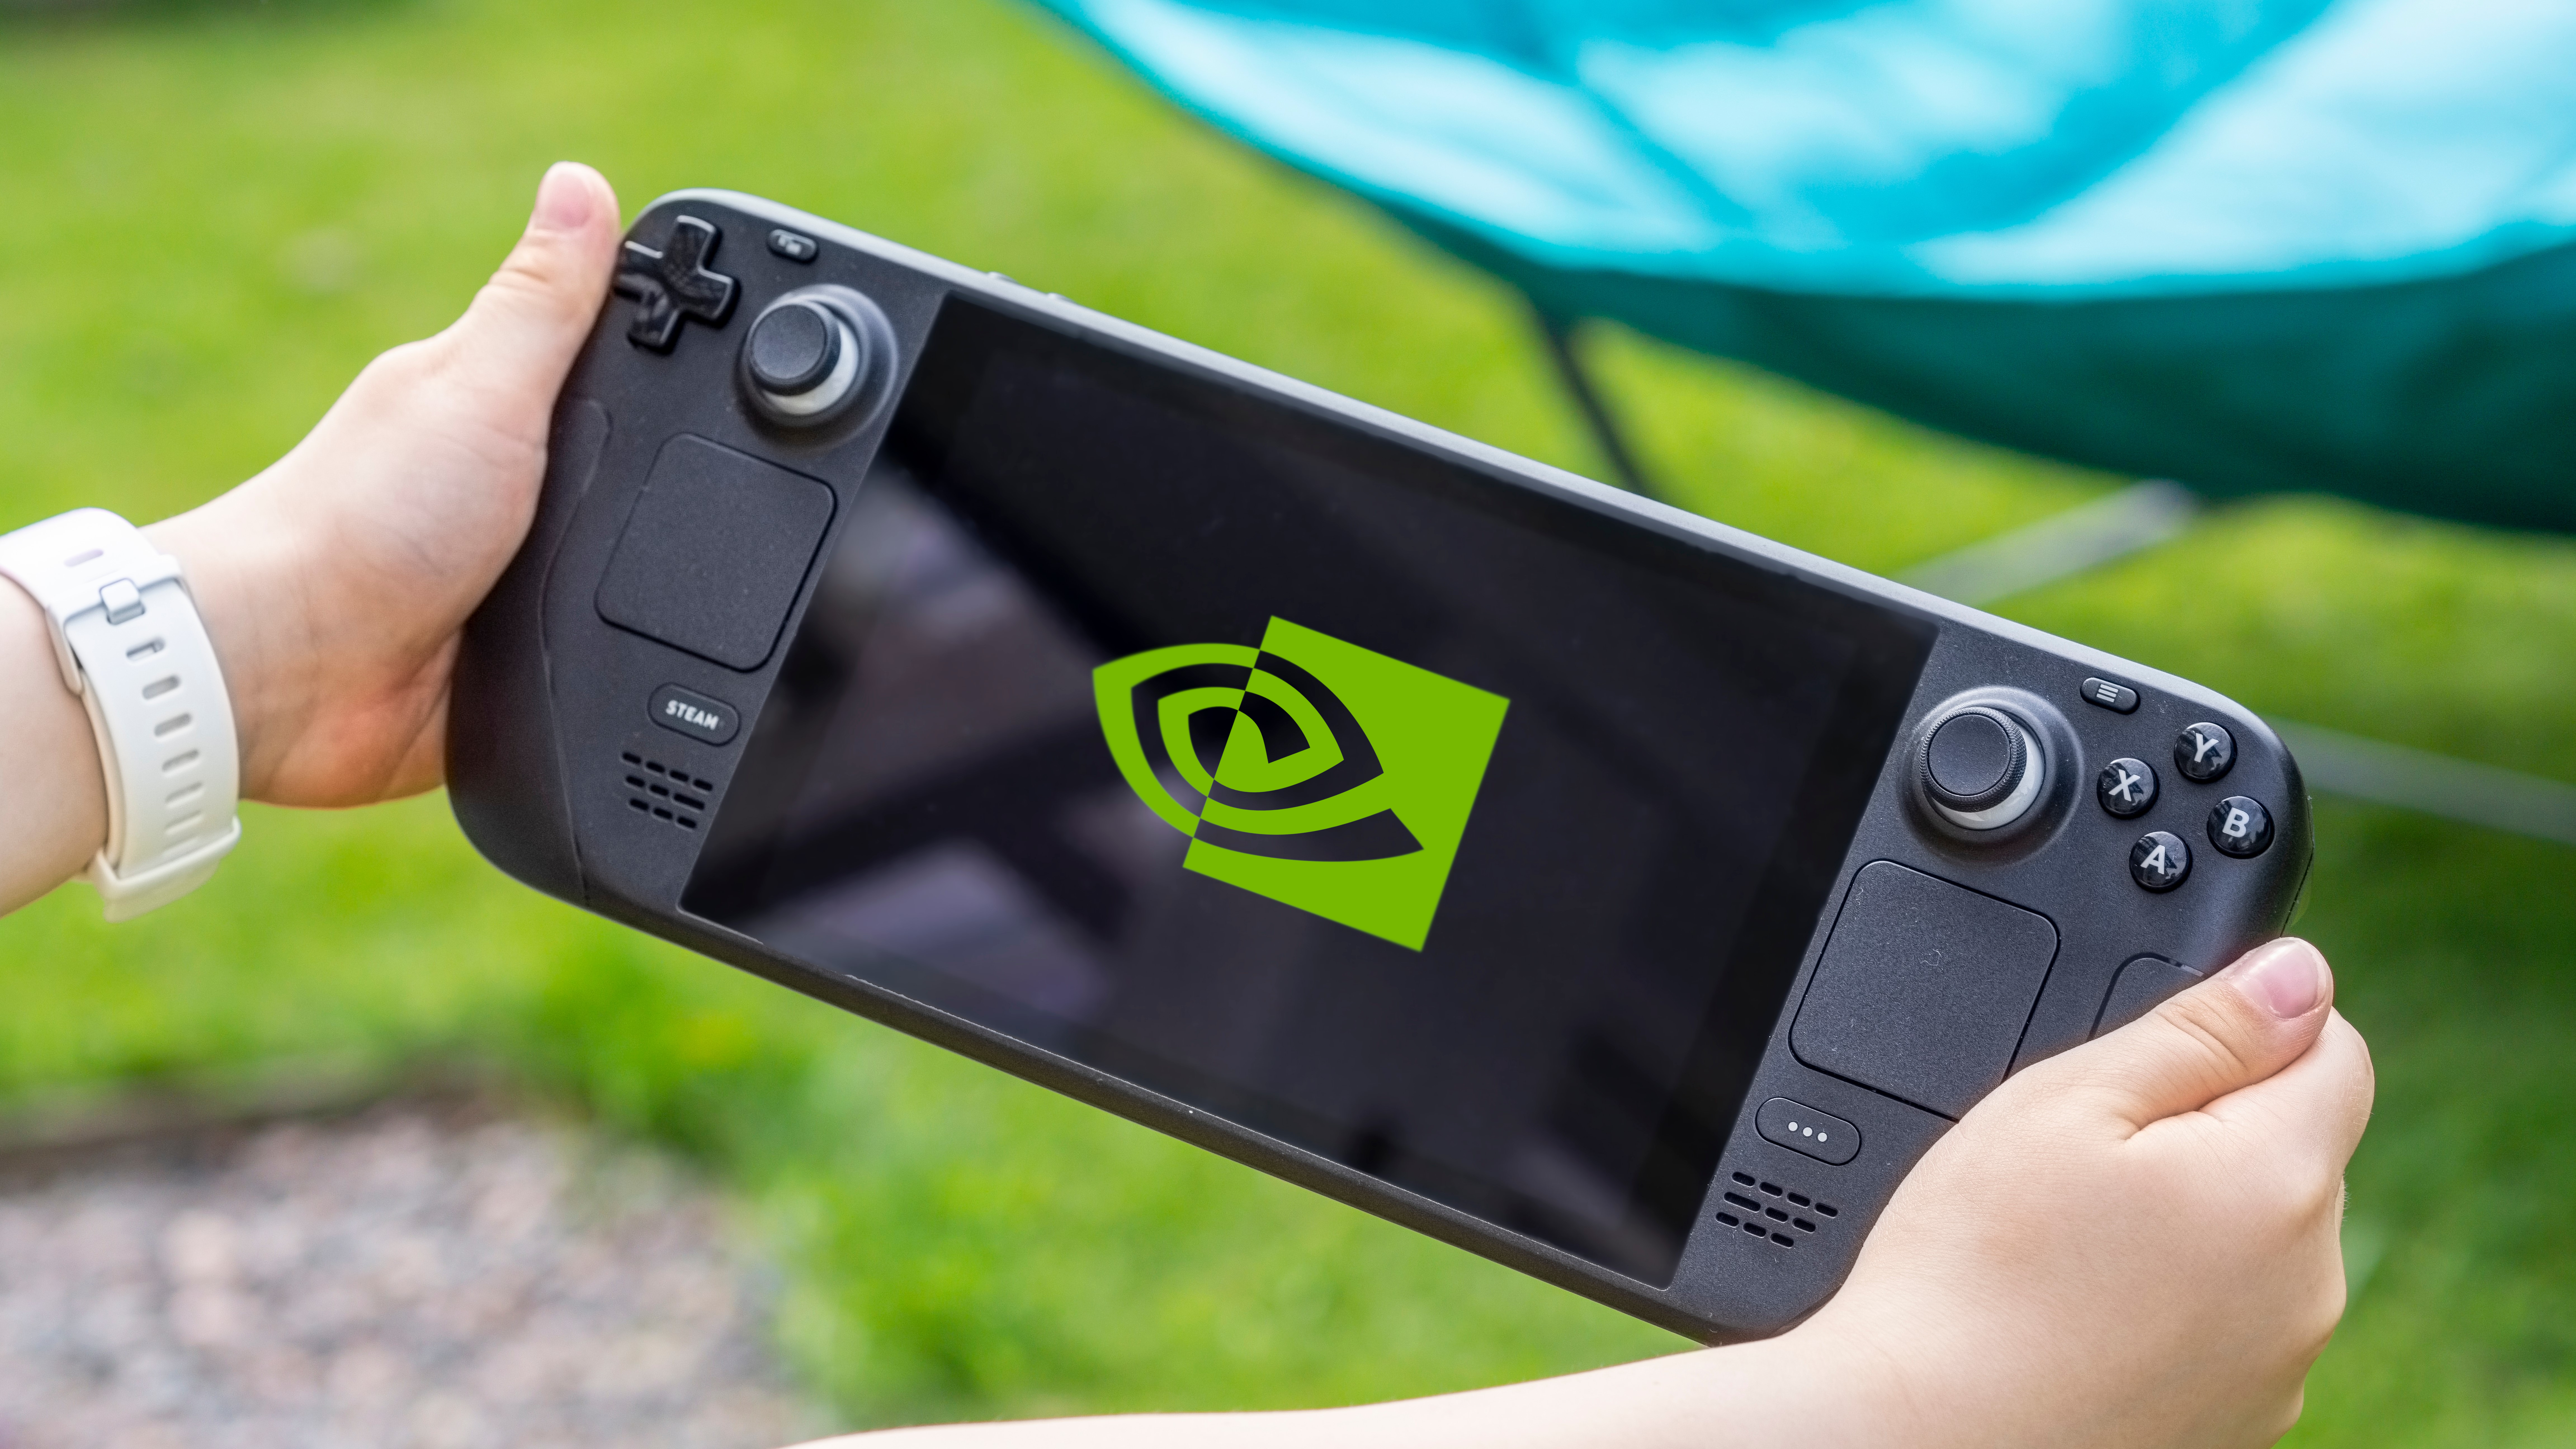 Nvidia may be working on a Steam Deck rival laptop – I just hope it’s not another Nvidia Shield